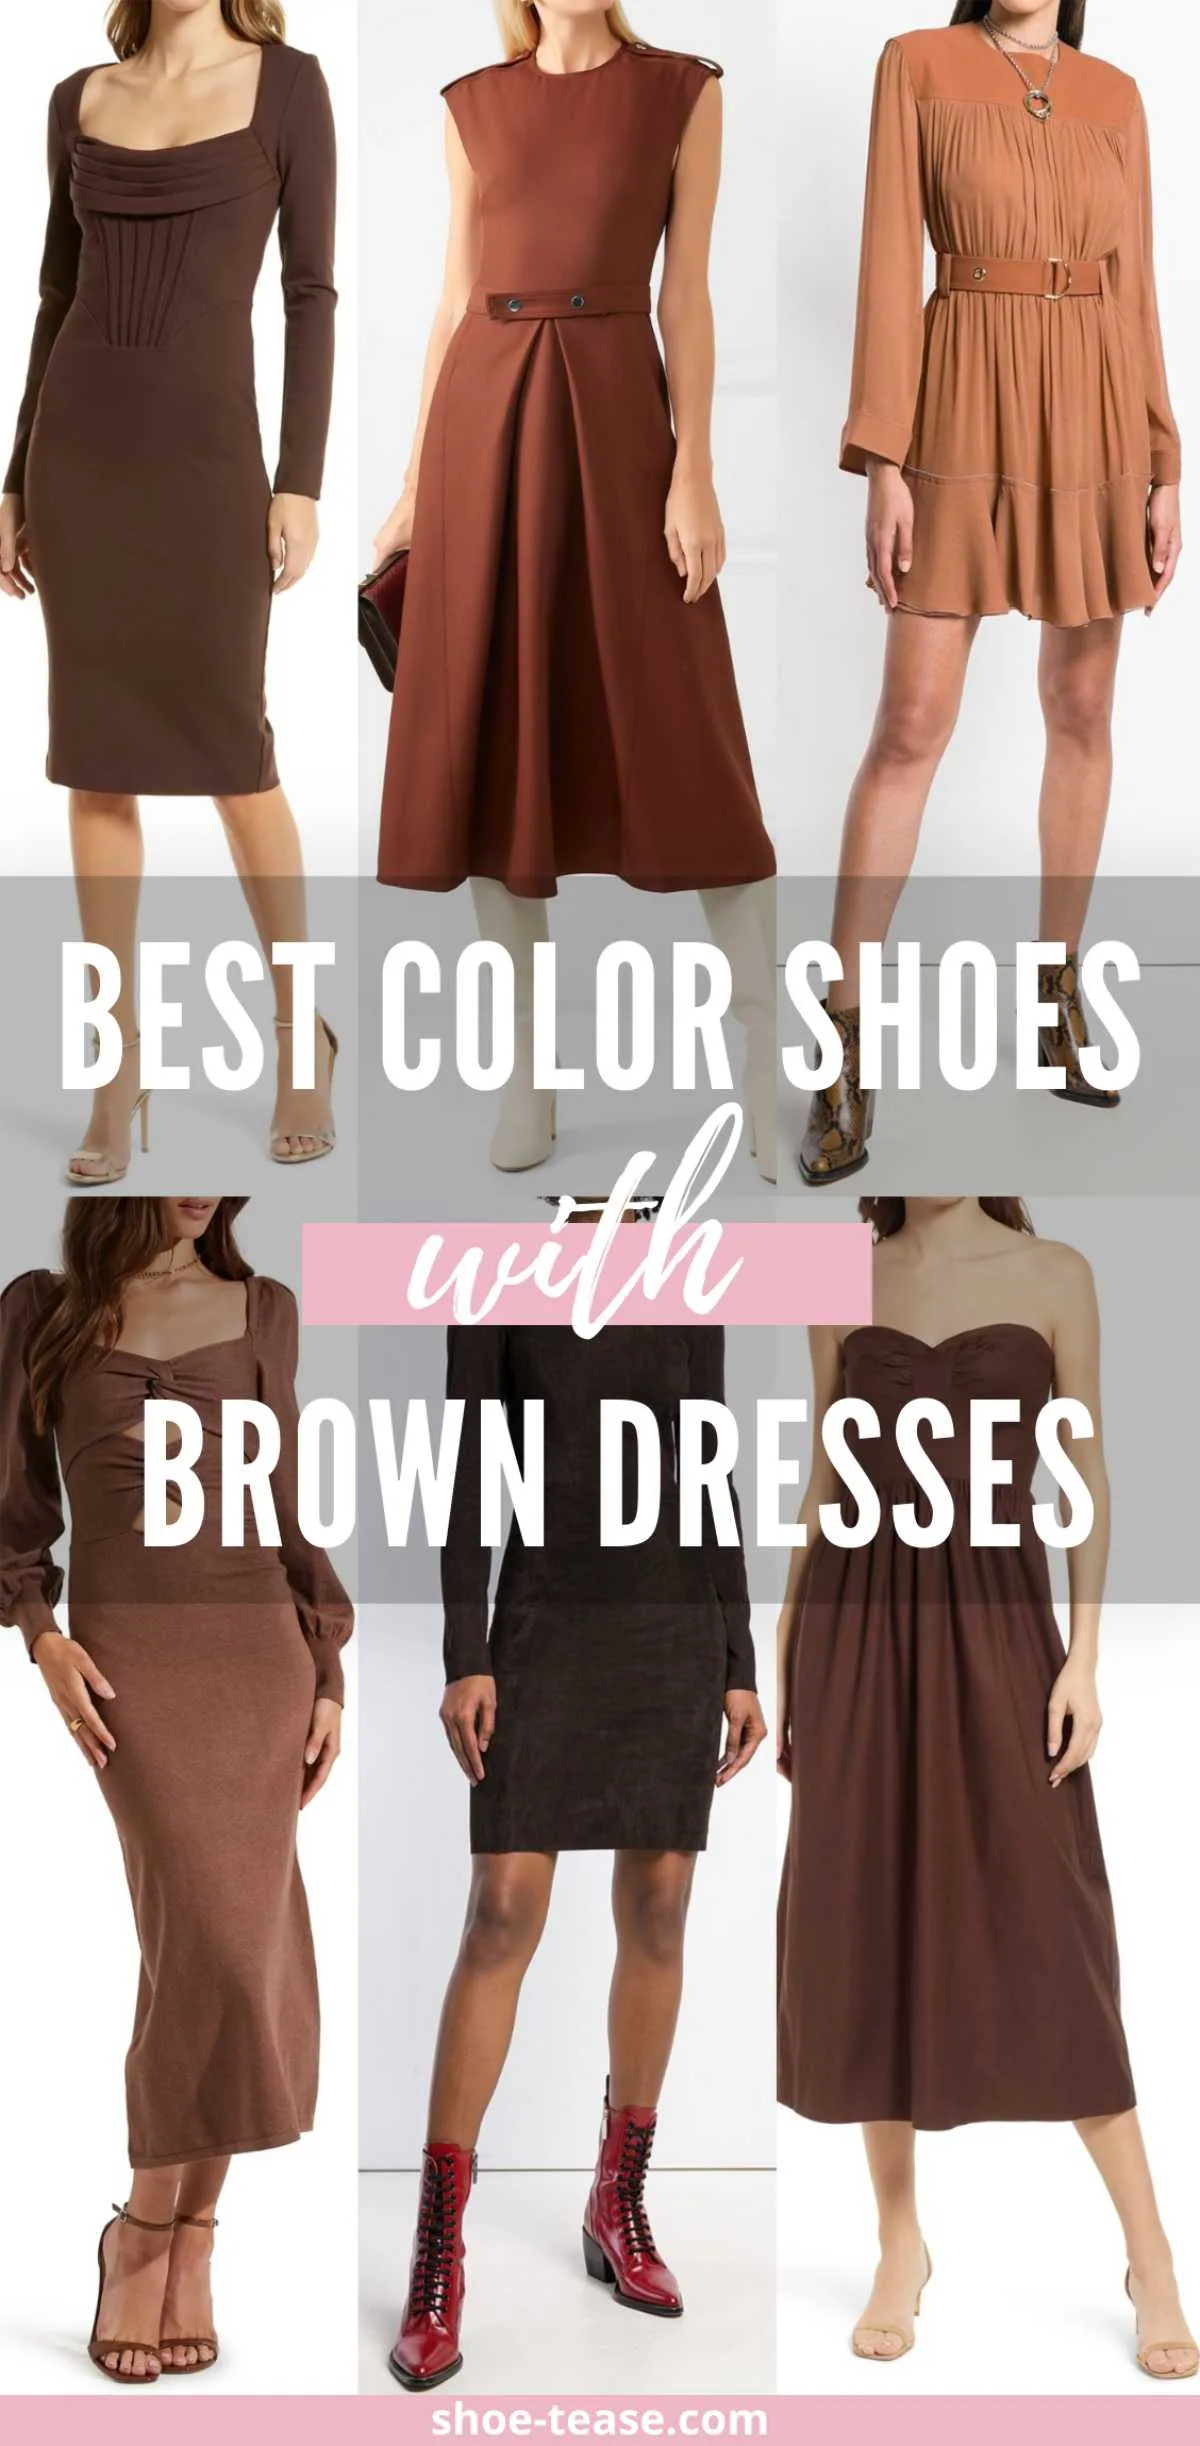 What color shoes to wear with a brown dress